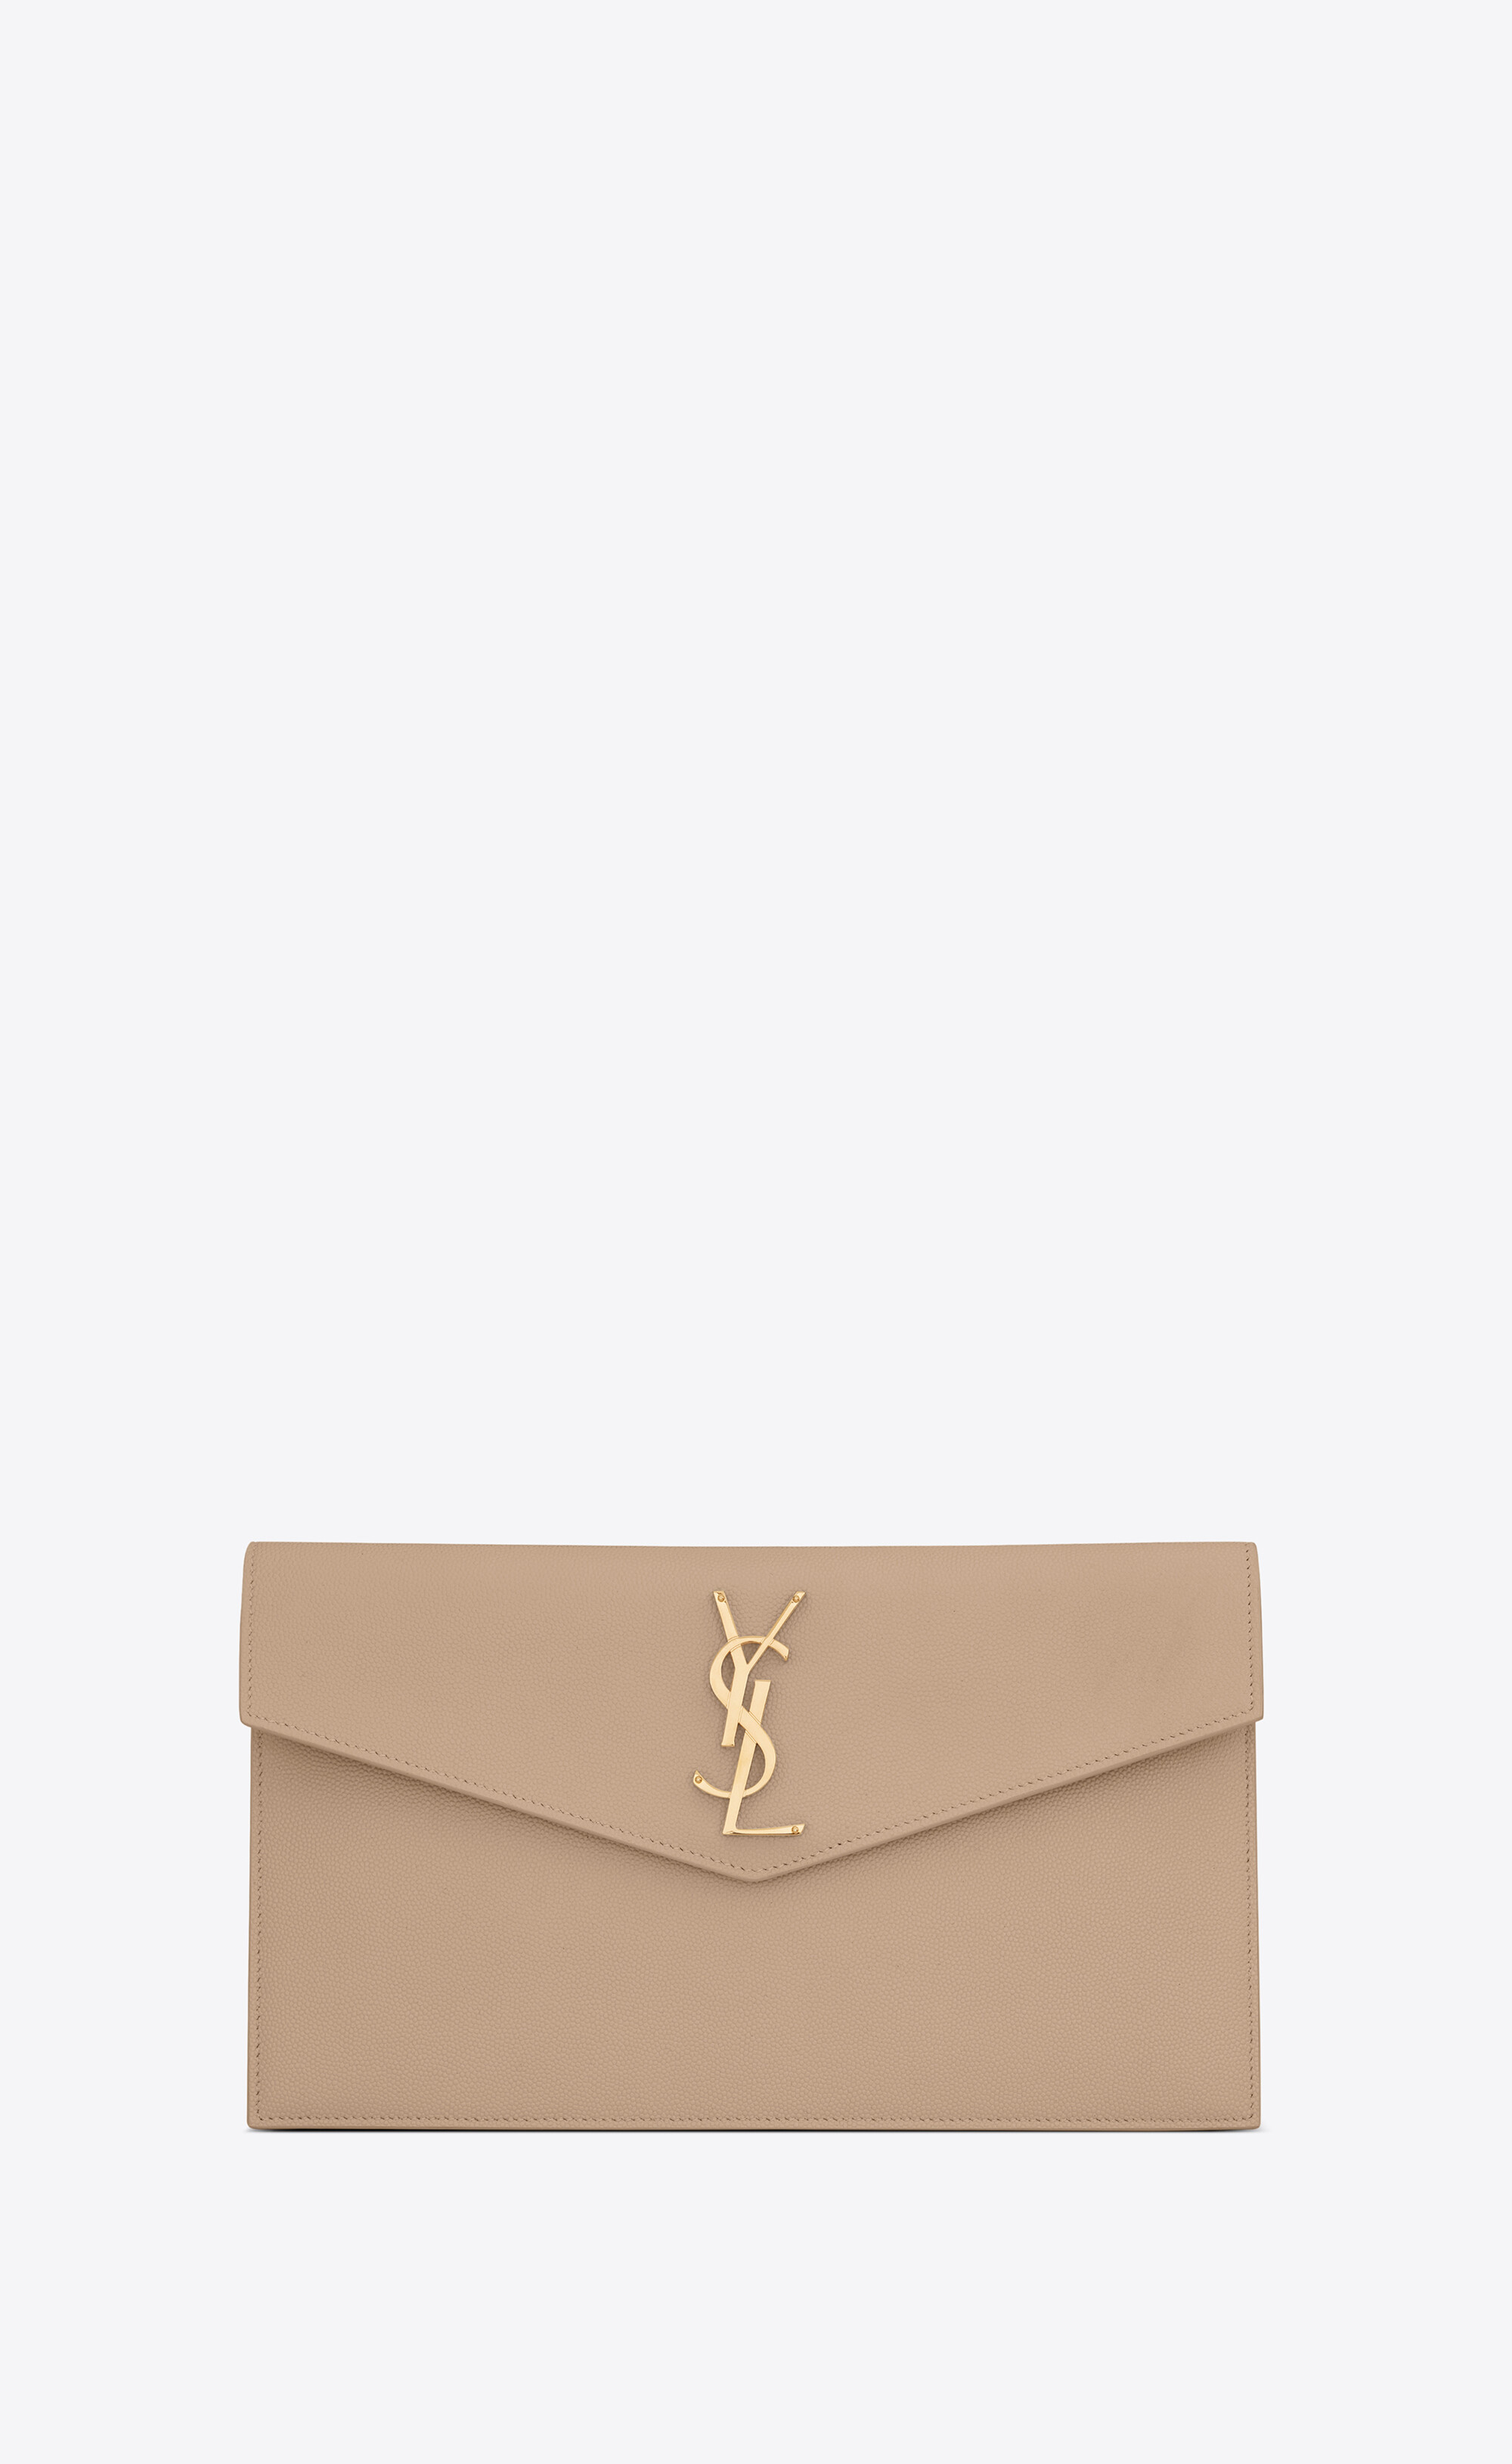 UPTOWN pouch in grain de poudre embossed leather